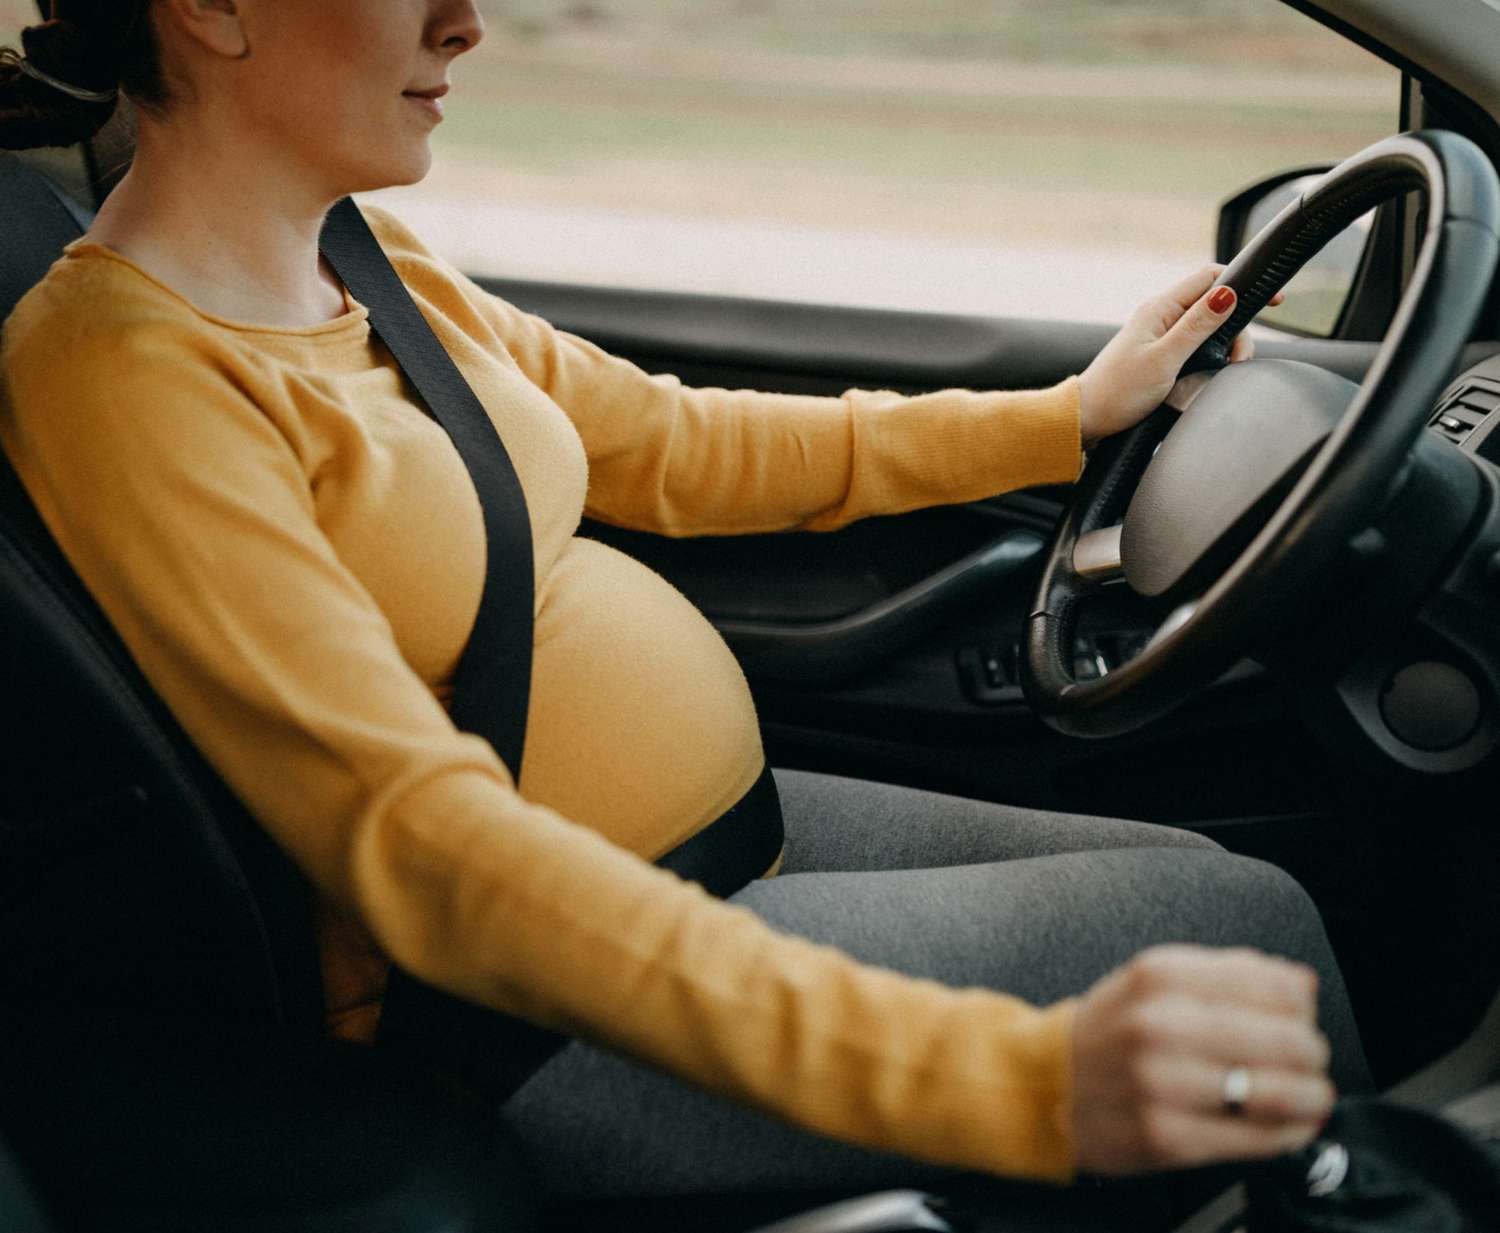 An image of a woman driving a car.